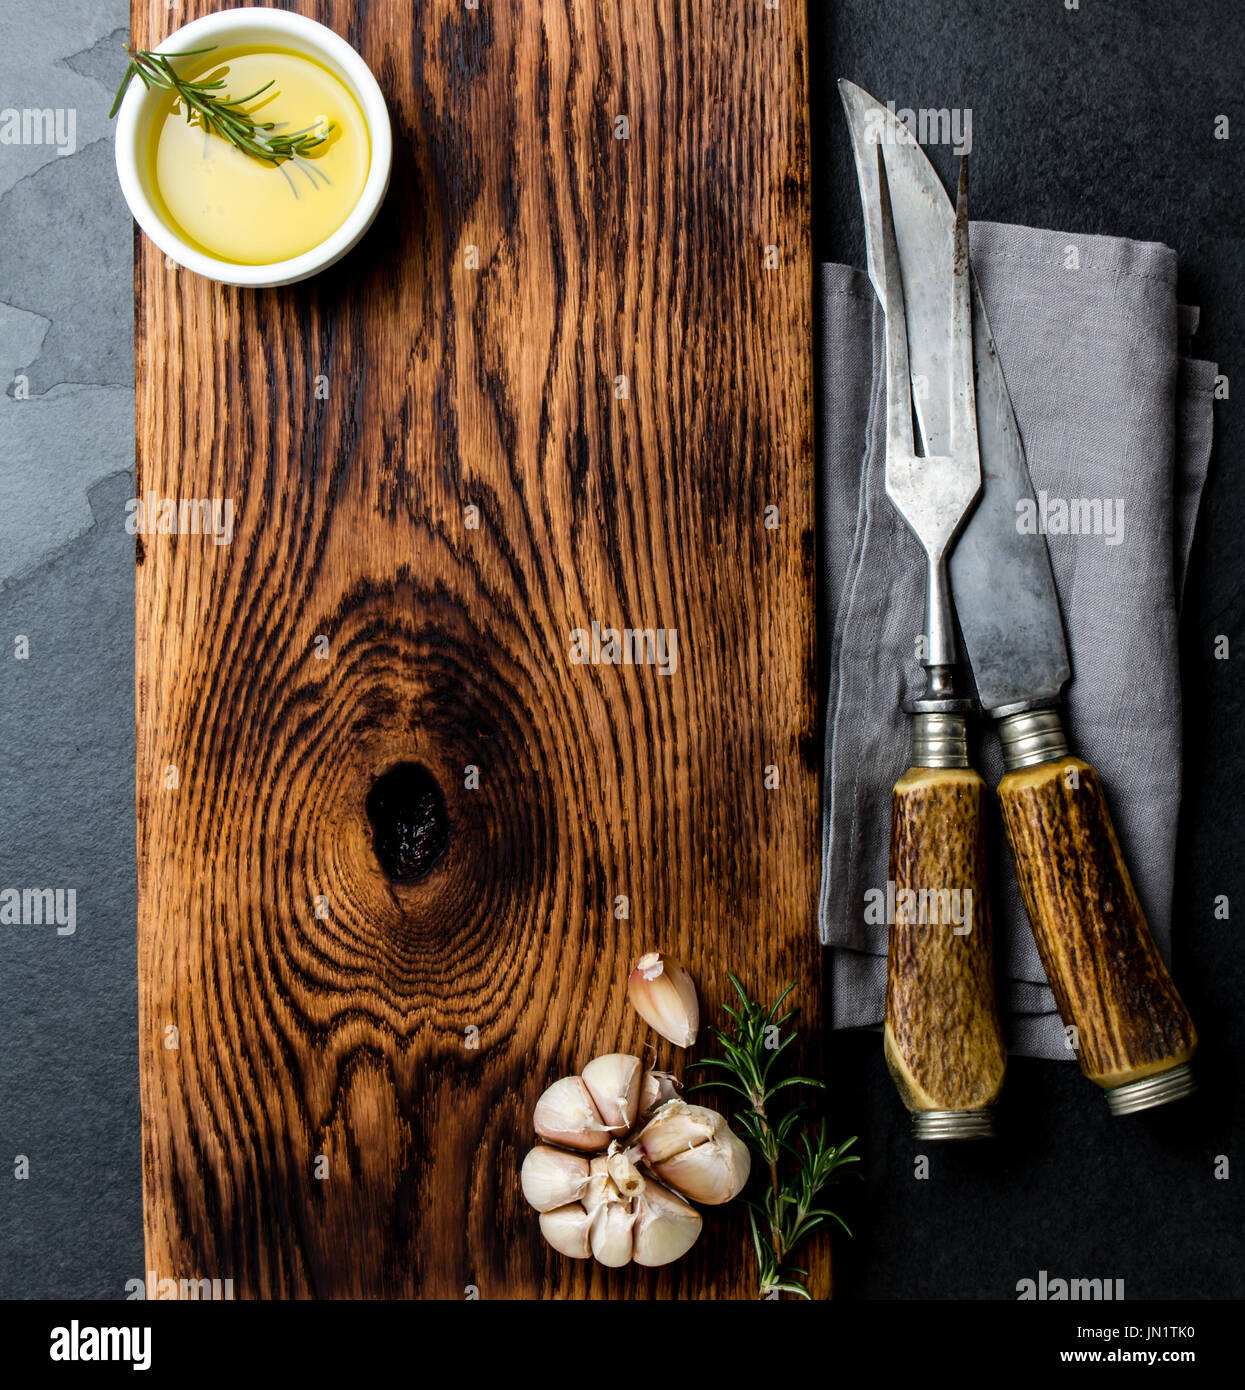 https://c8.alamy.com/comp/JN1TK0/cooking-background-concept-vintage-cutting-board-cutlery-and-spices-JN1TK0.jpg